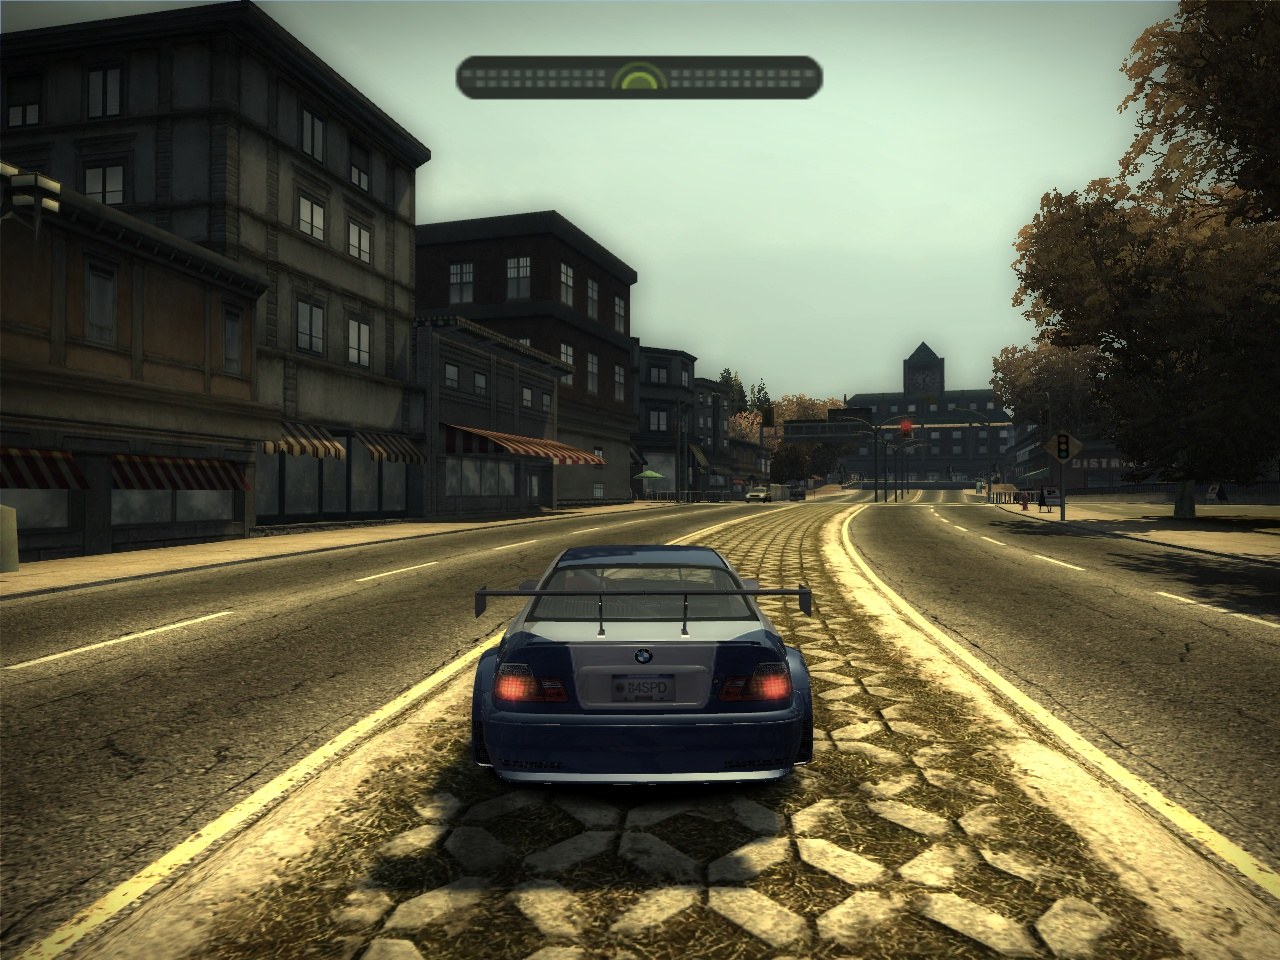 Нед фор спид мост вондет. Need for Speed most wanted 2005. Нфс most wanted. NFS most wanted 2005 мост. Гонки NFS most wanted 2005.